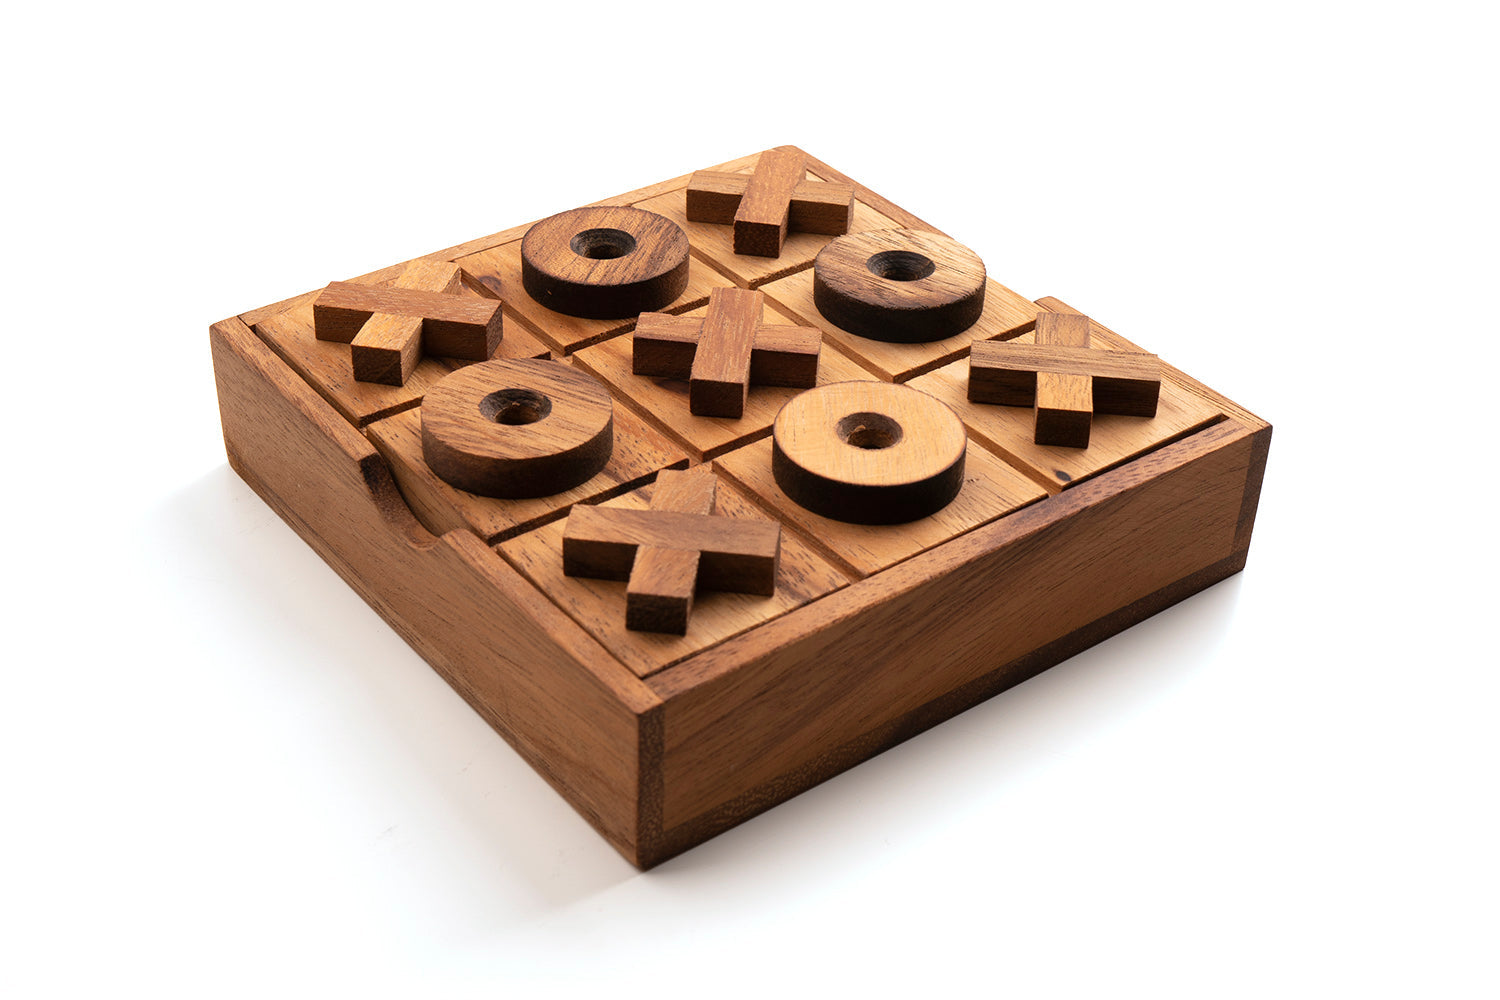 5X5 Inch Wooden Two Tik Tok Toe Game